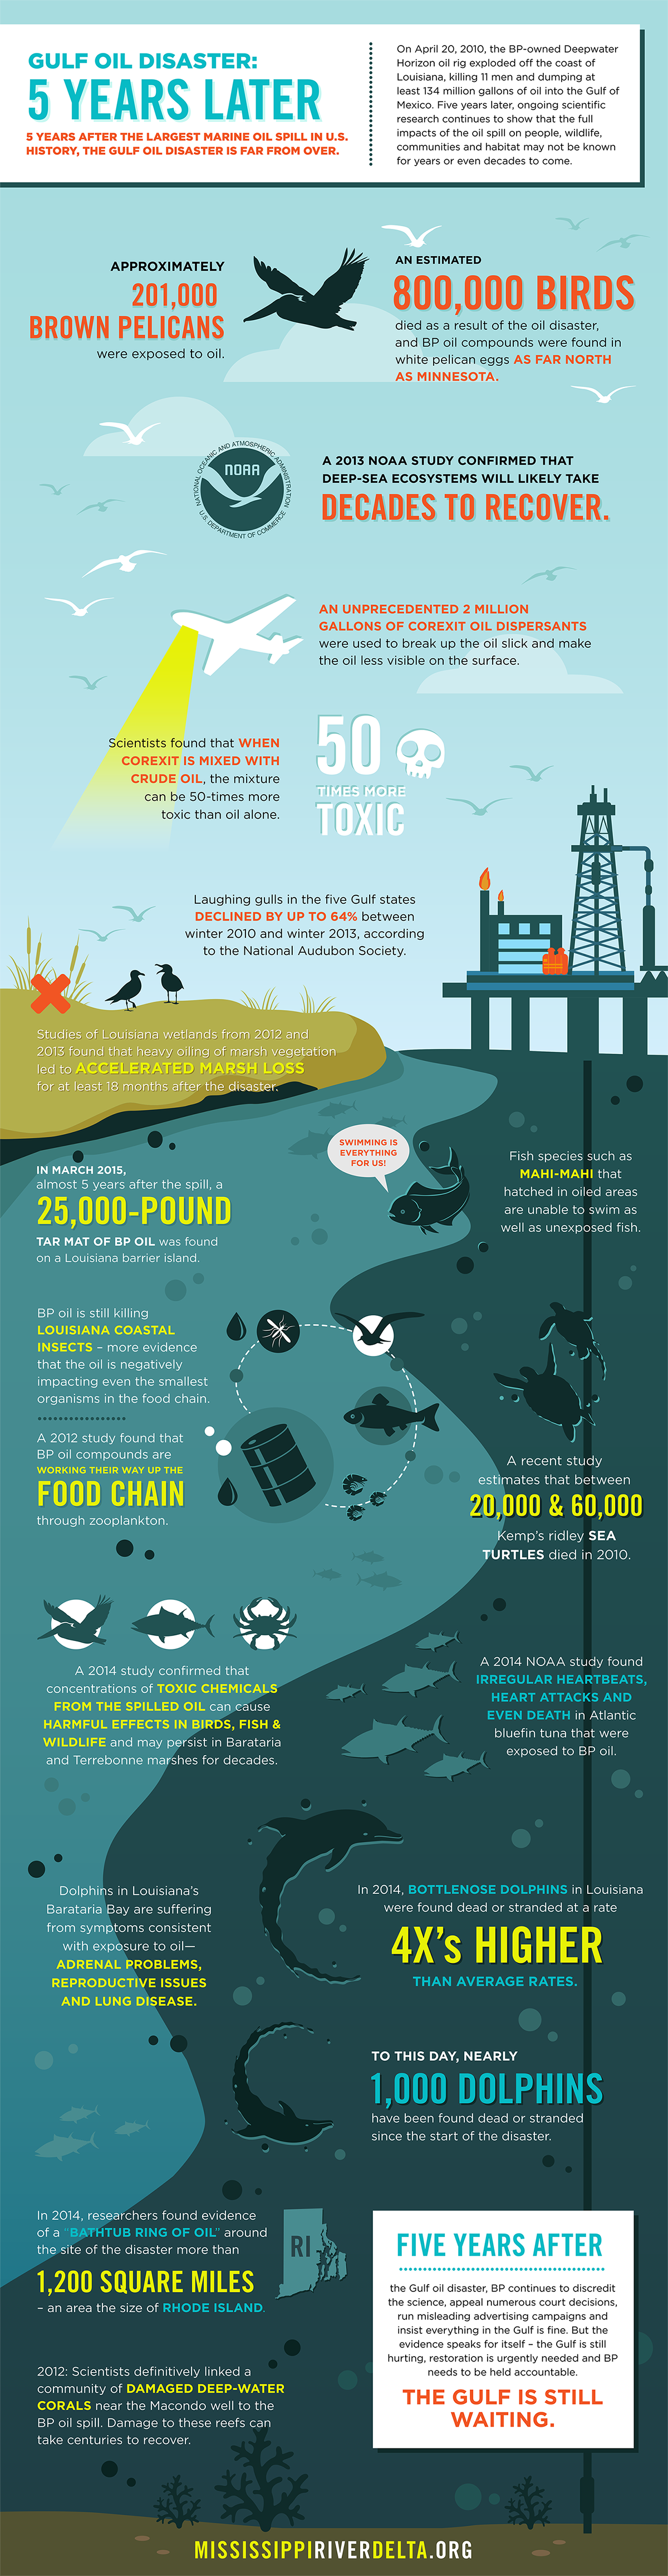 Gulf Oil Disaster: 5 Years Later Infographic